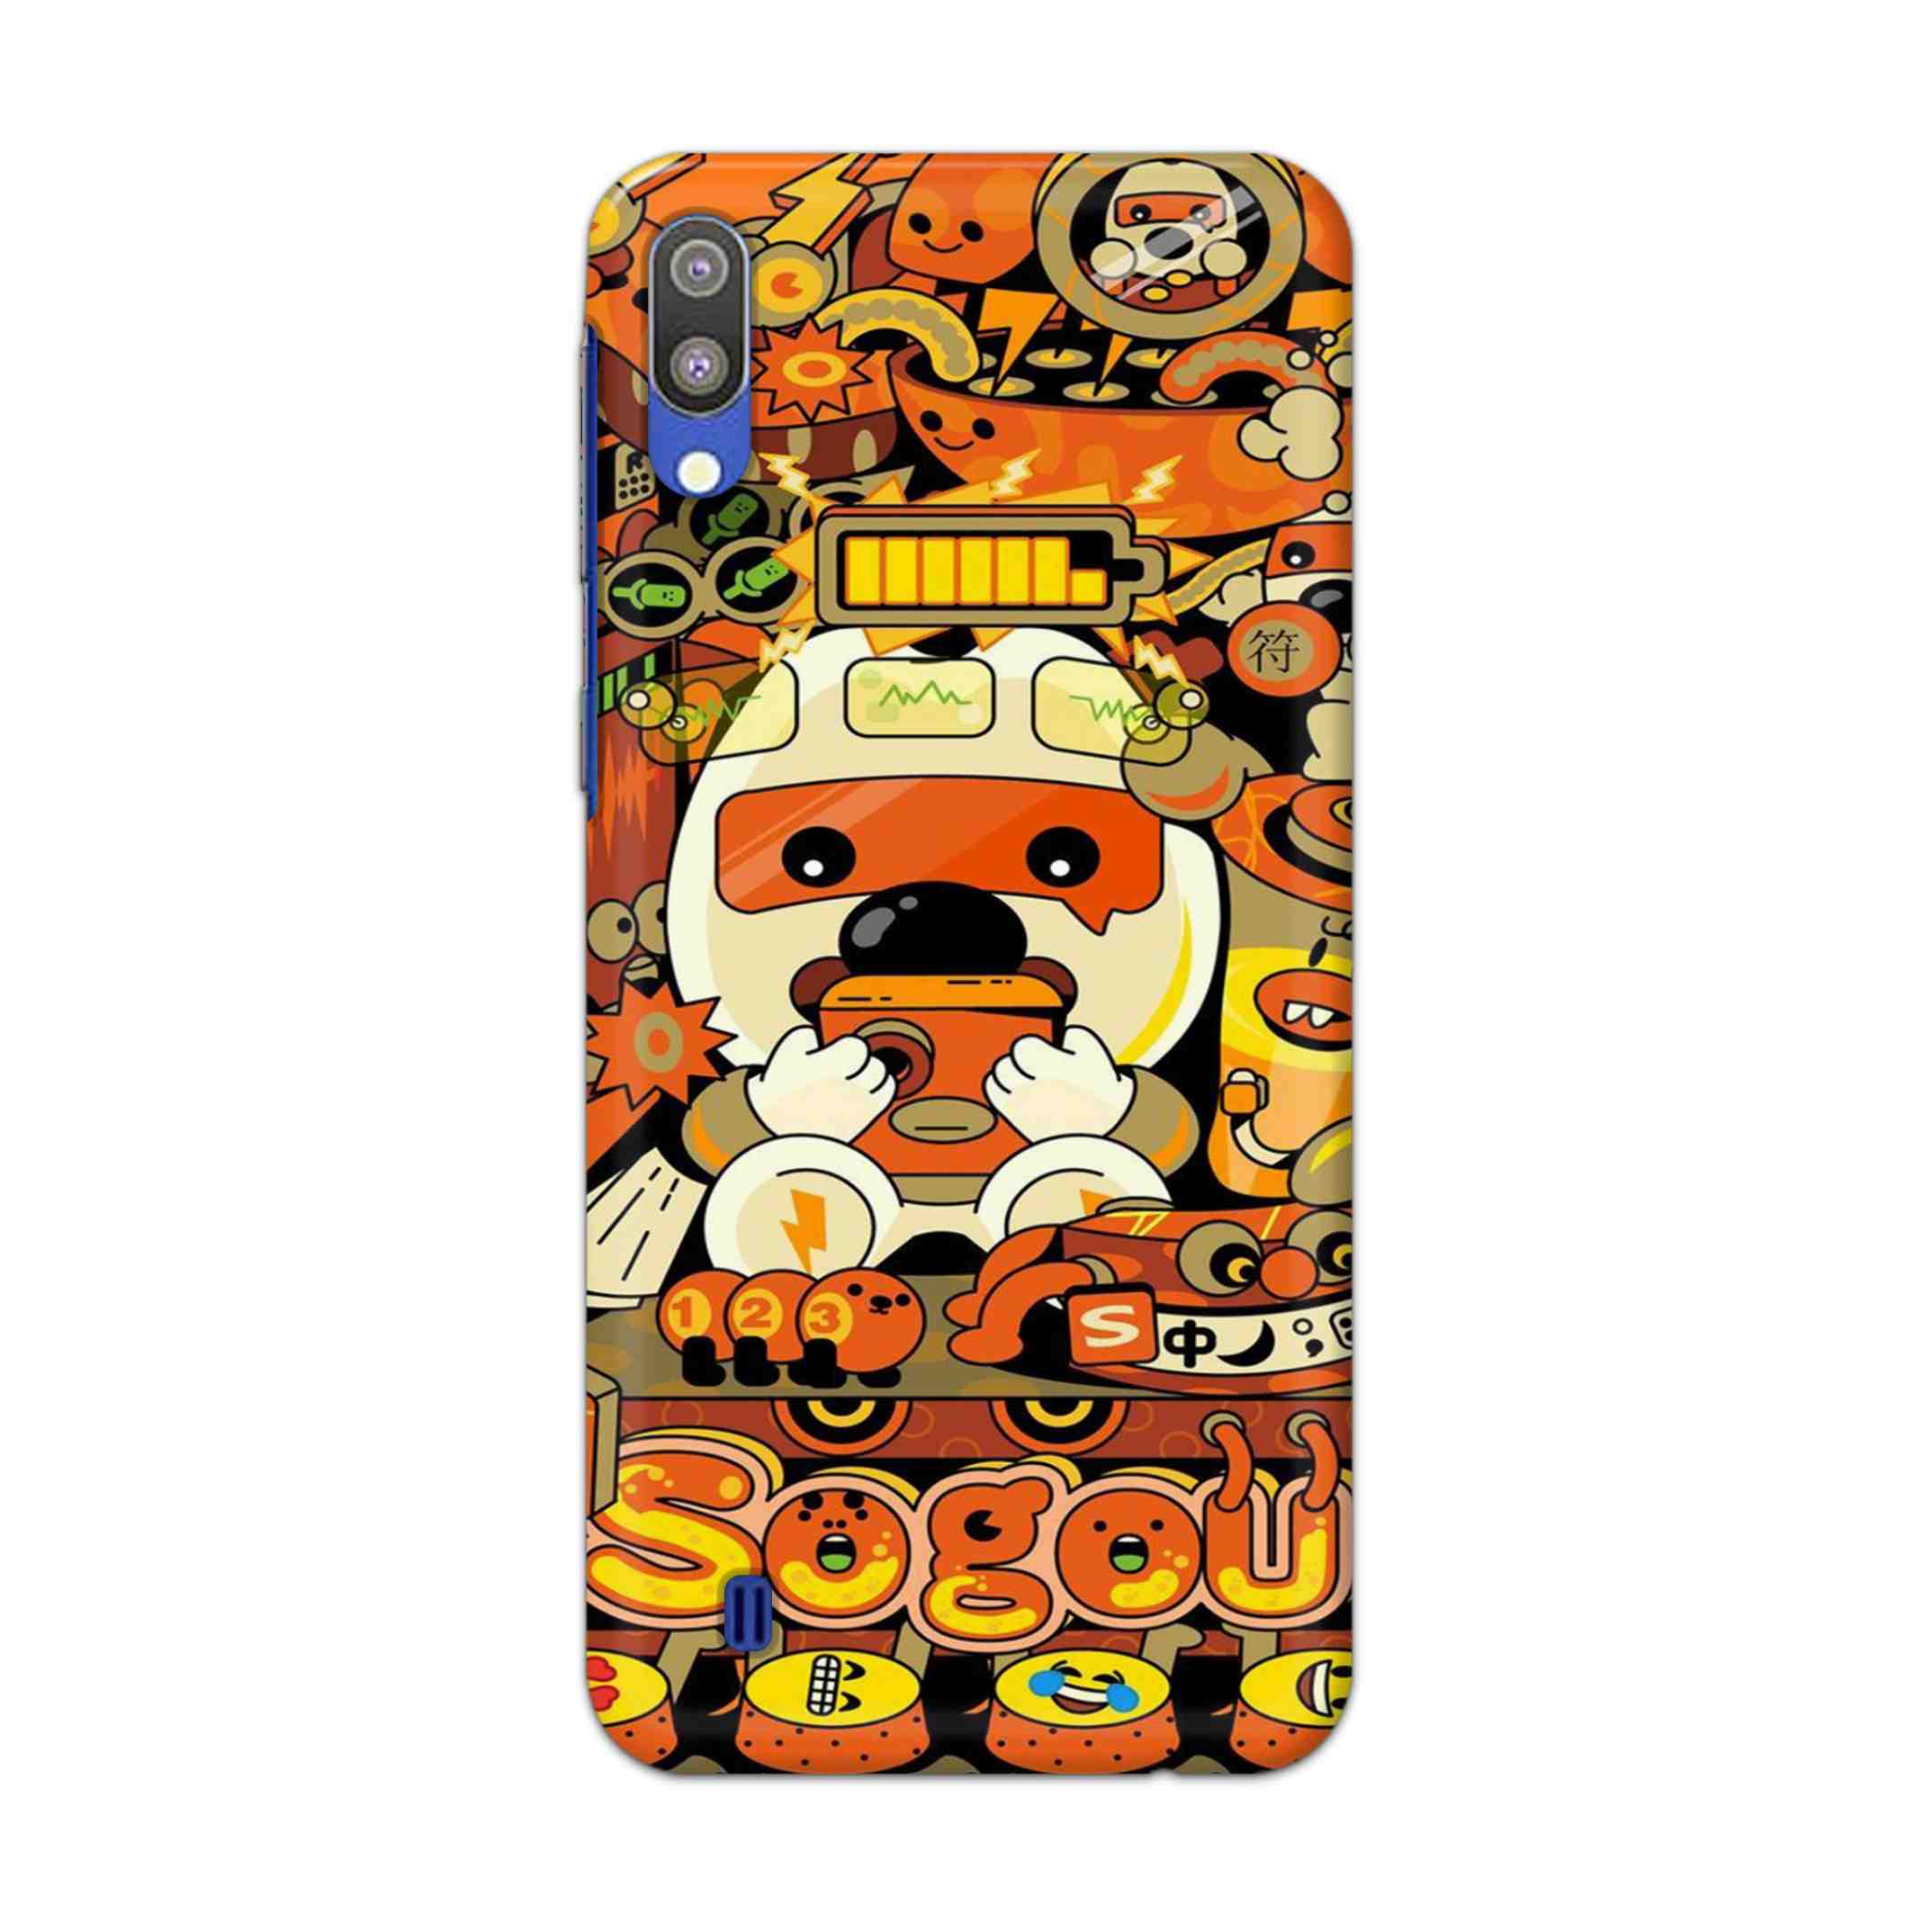 Buy Sogou Hard Back Mobile Phone Case Cover For Samsung Galaxy M10 Online